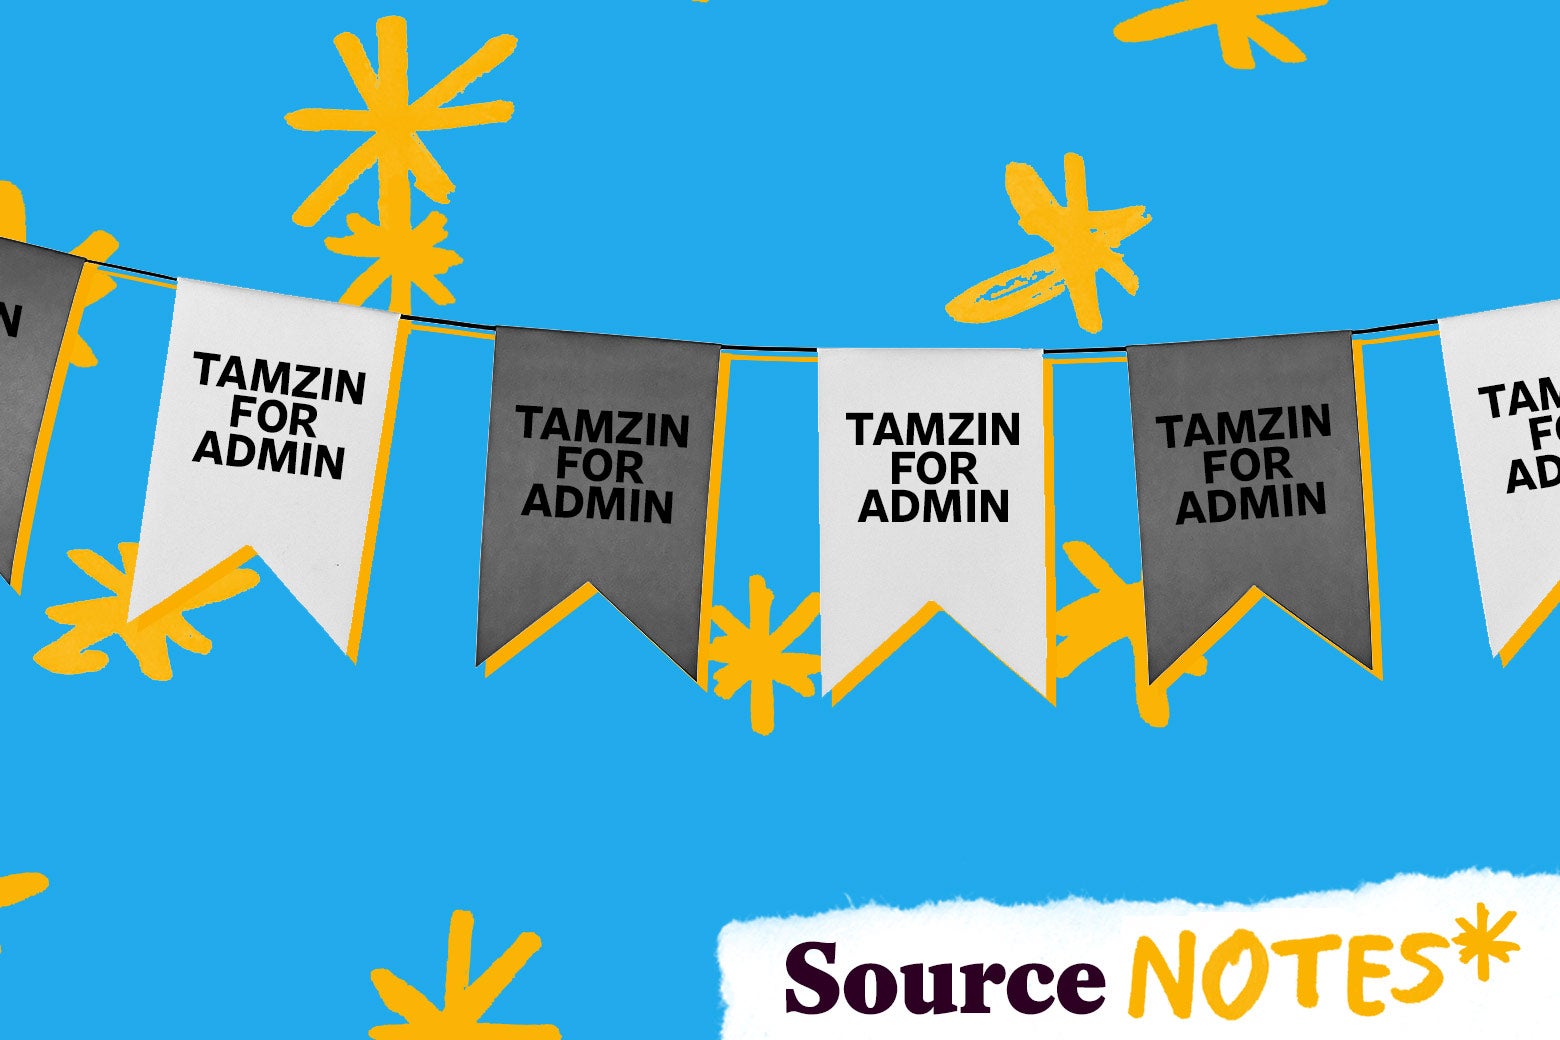 A string of banners that read "Tamzin for Admin"